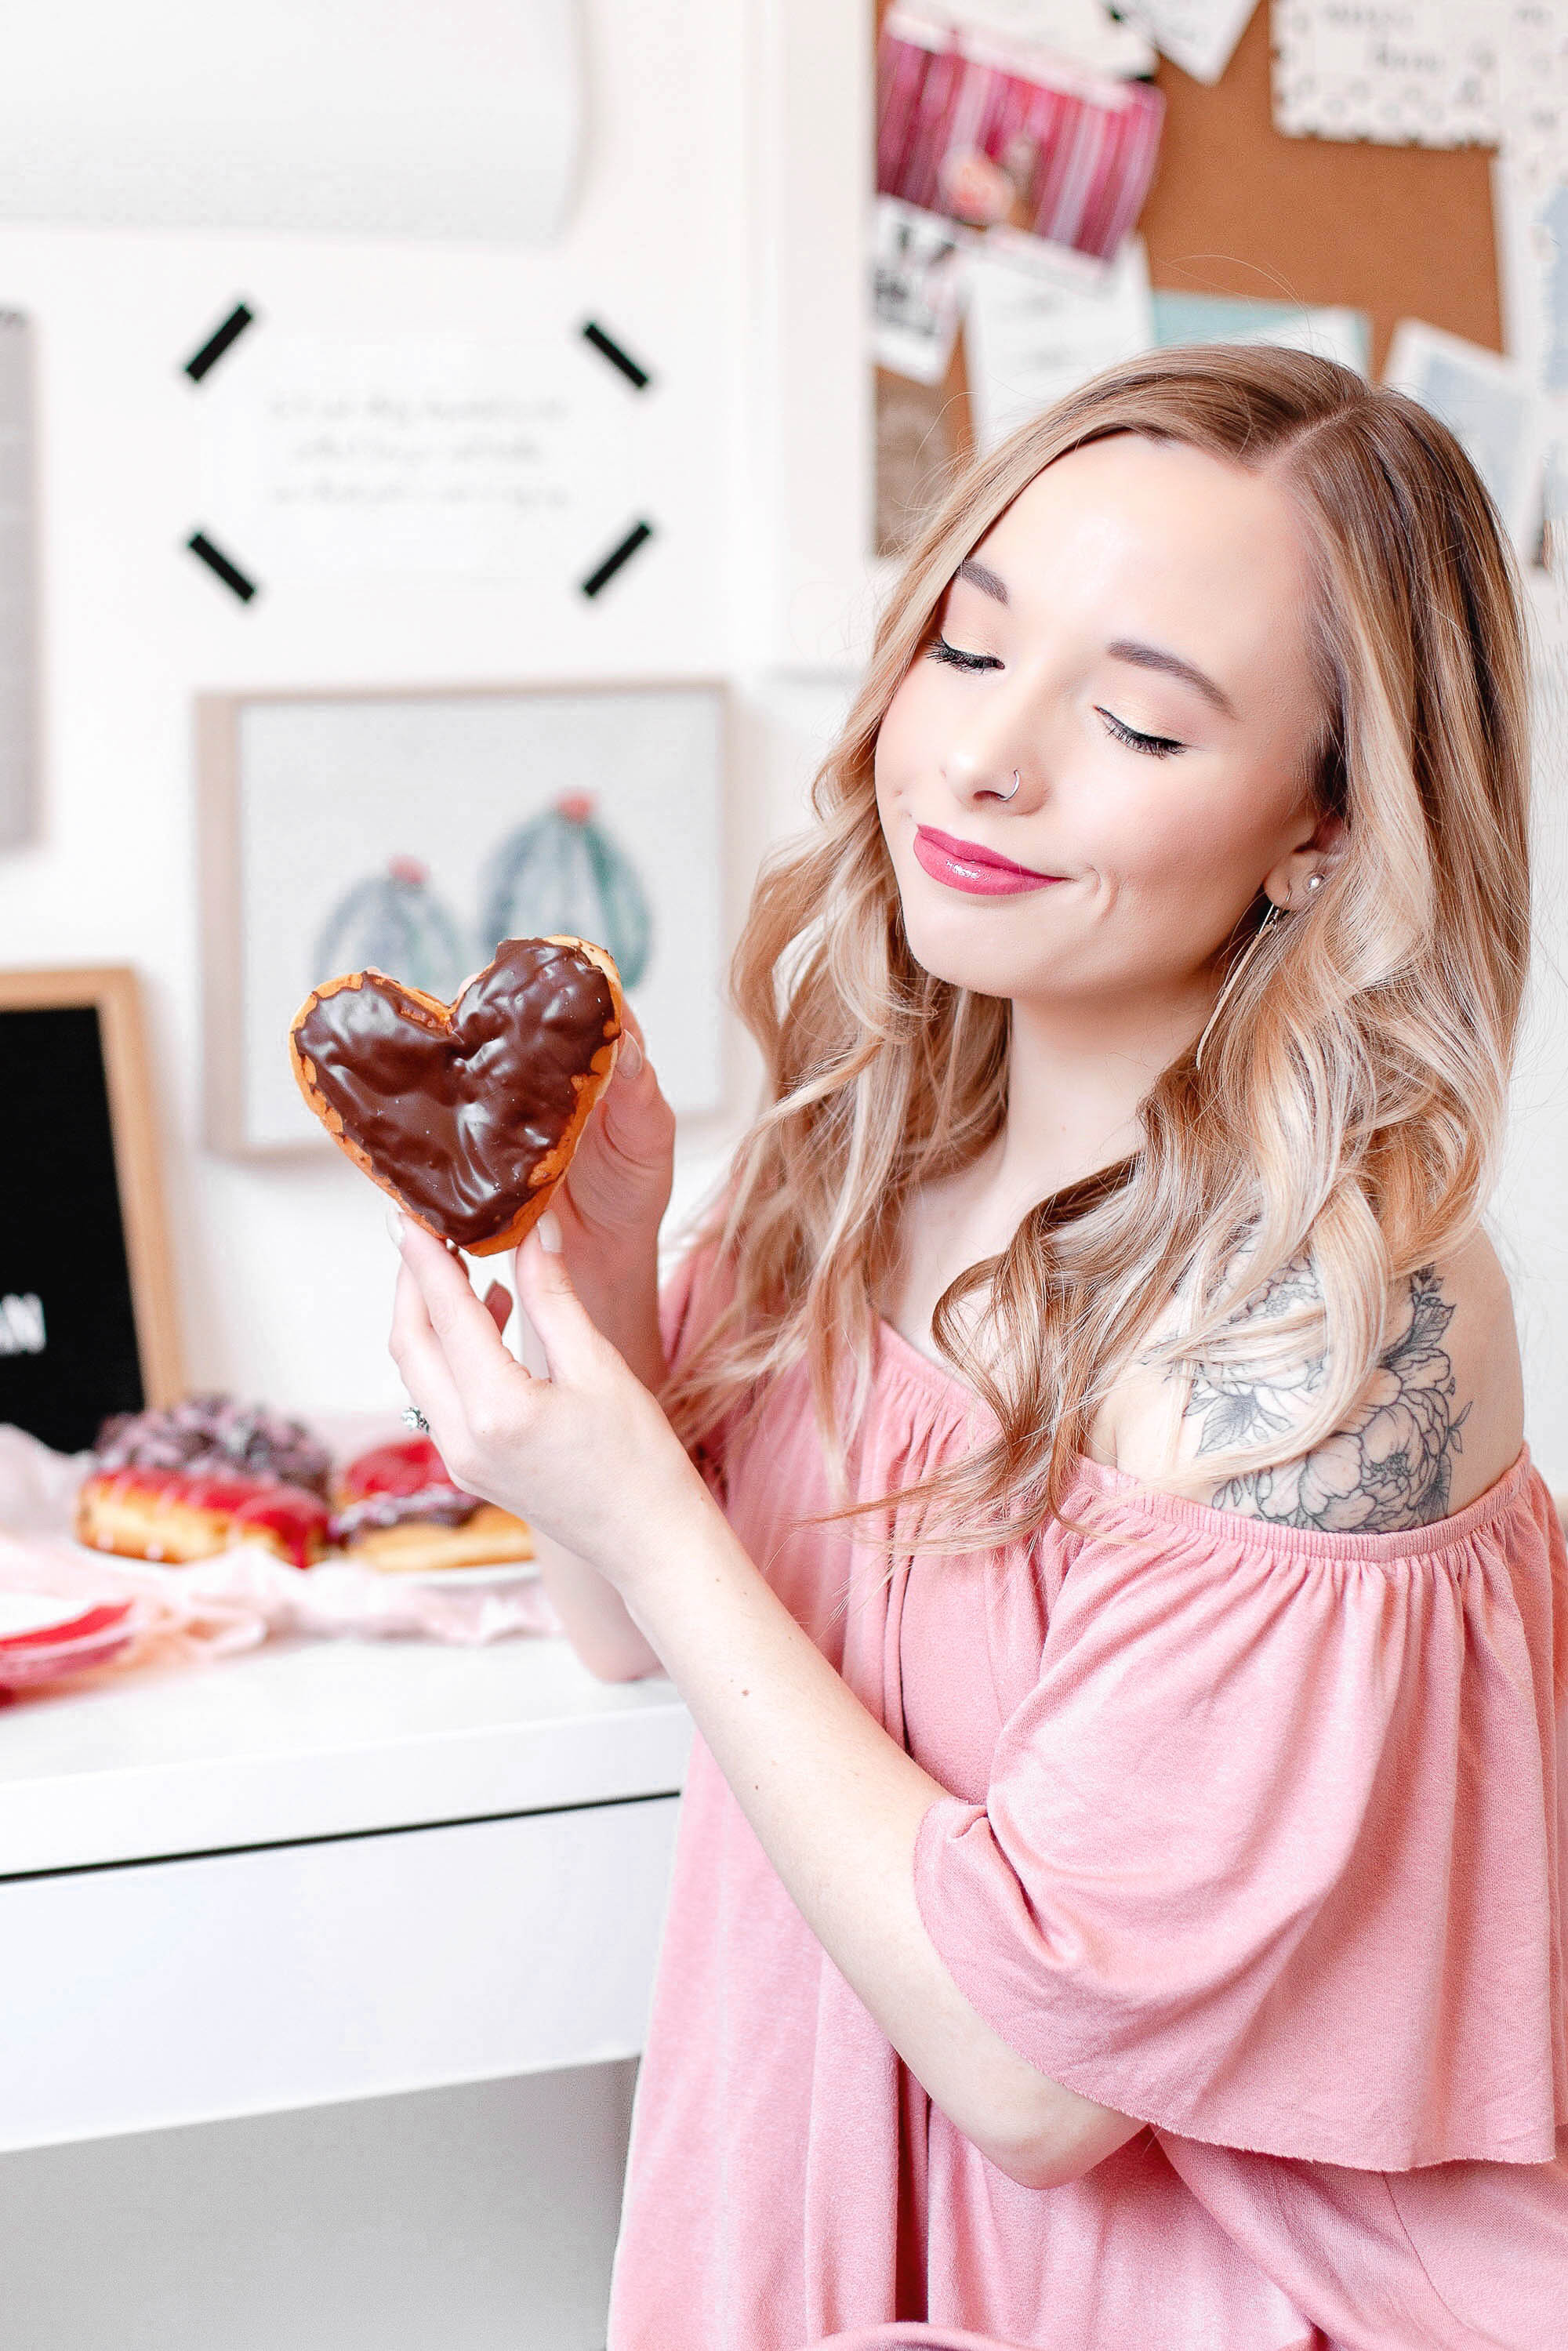 A Blogger's Valentine's Day Photoshoot